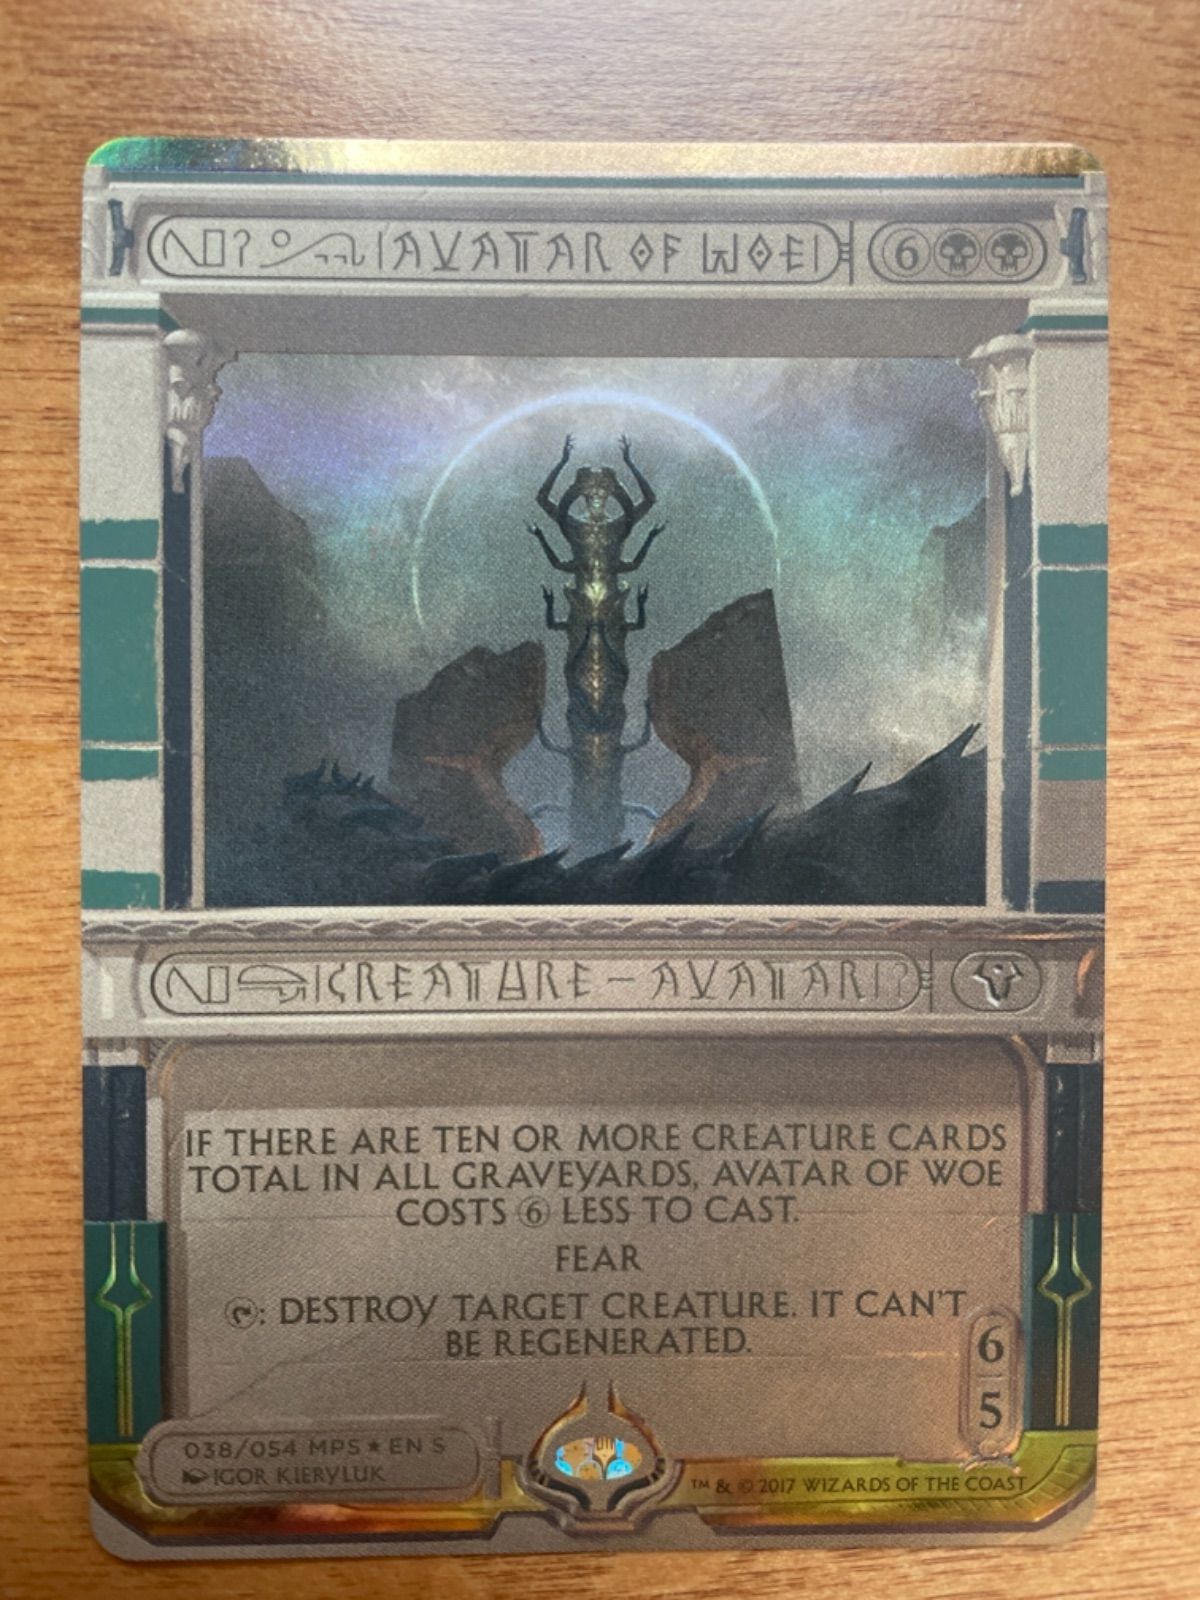 Avatar of Woe, Masterpiece Series: Invocations